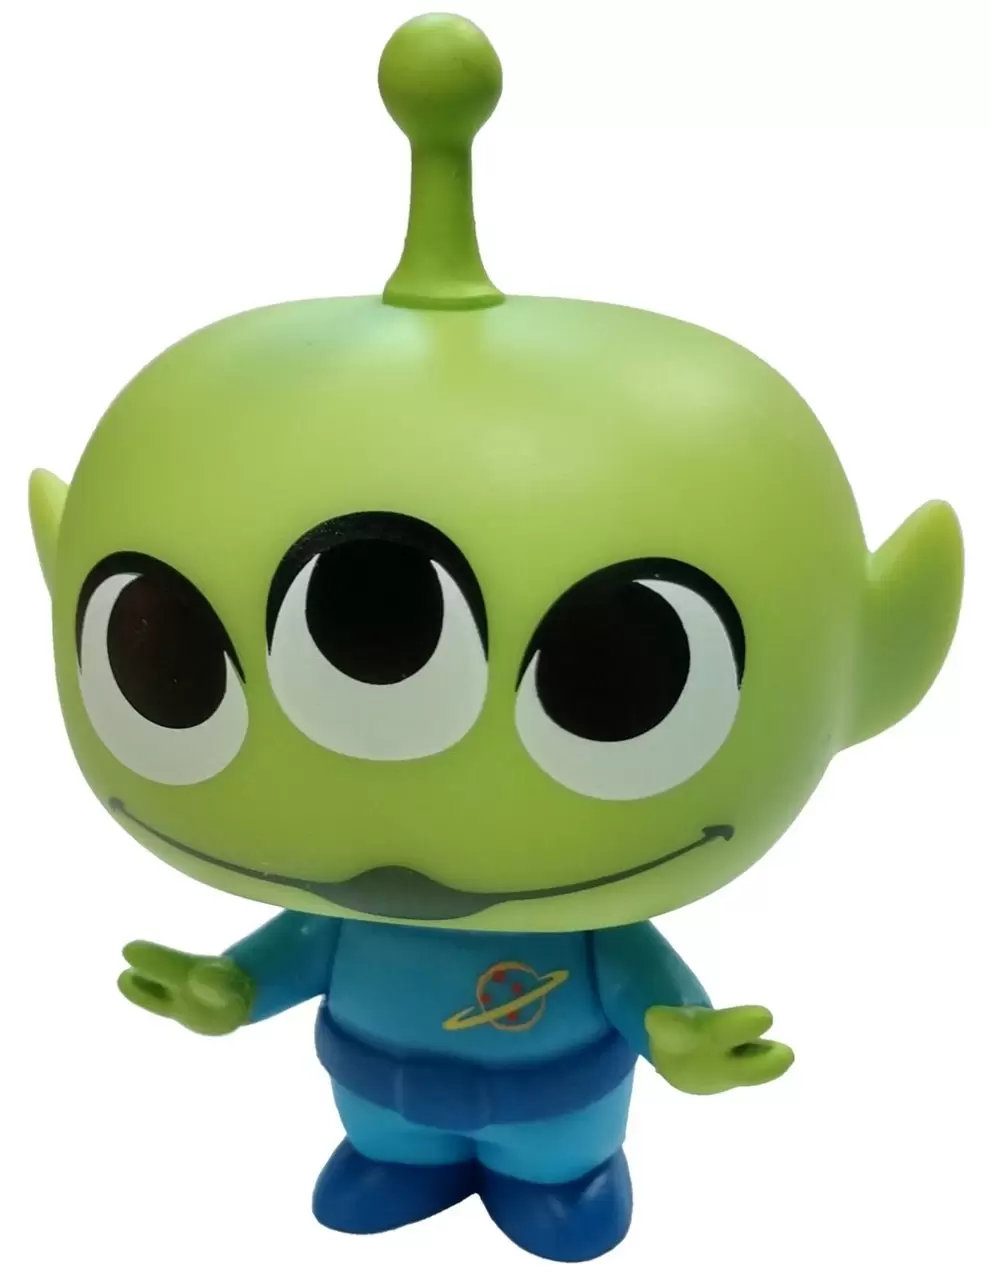 Mystery Minis - Toy story 4 - Alien